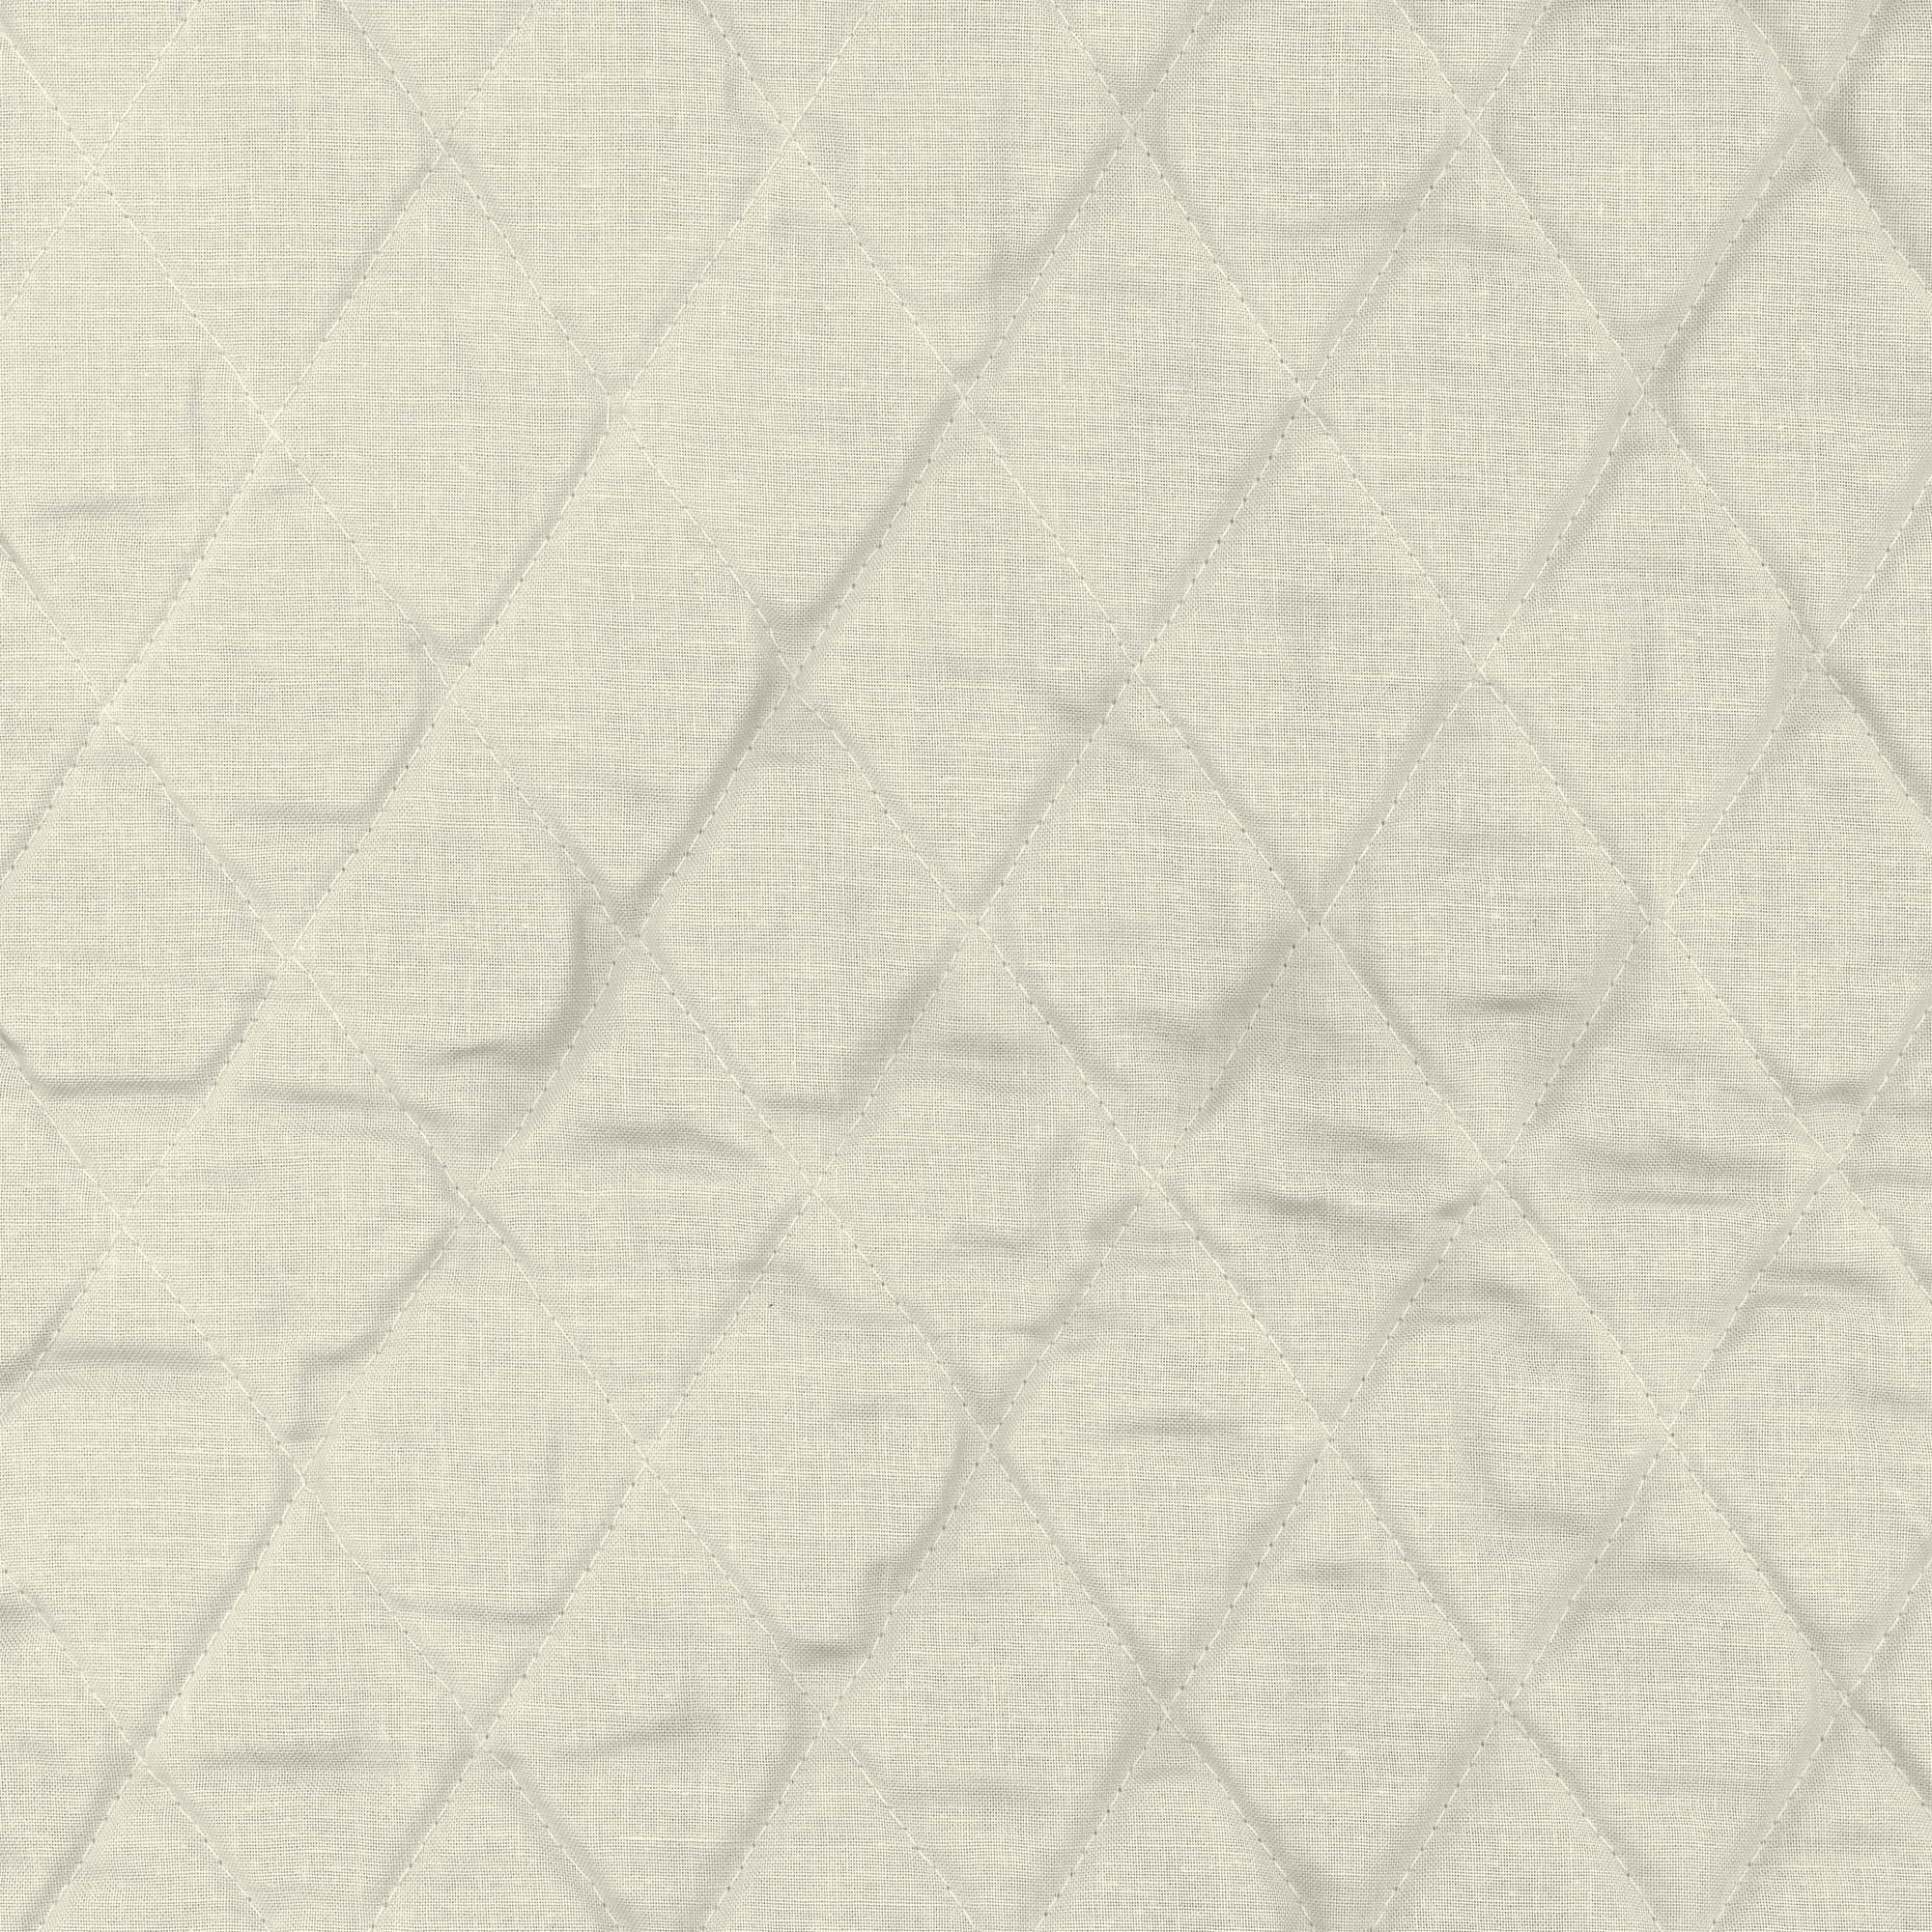 David Textiles 42 inch Cotton Double-Faced Quilt Solid Fabric by The Yard, Cream